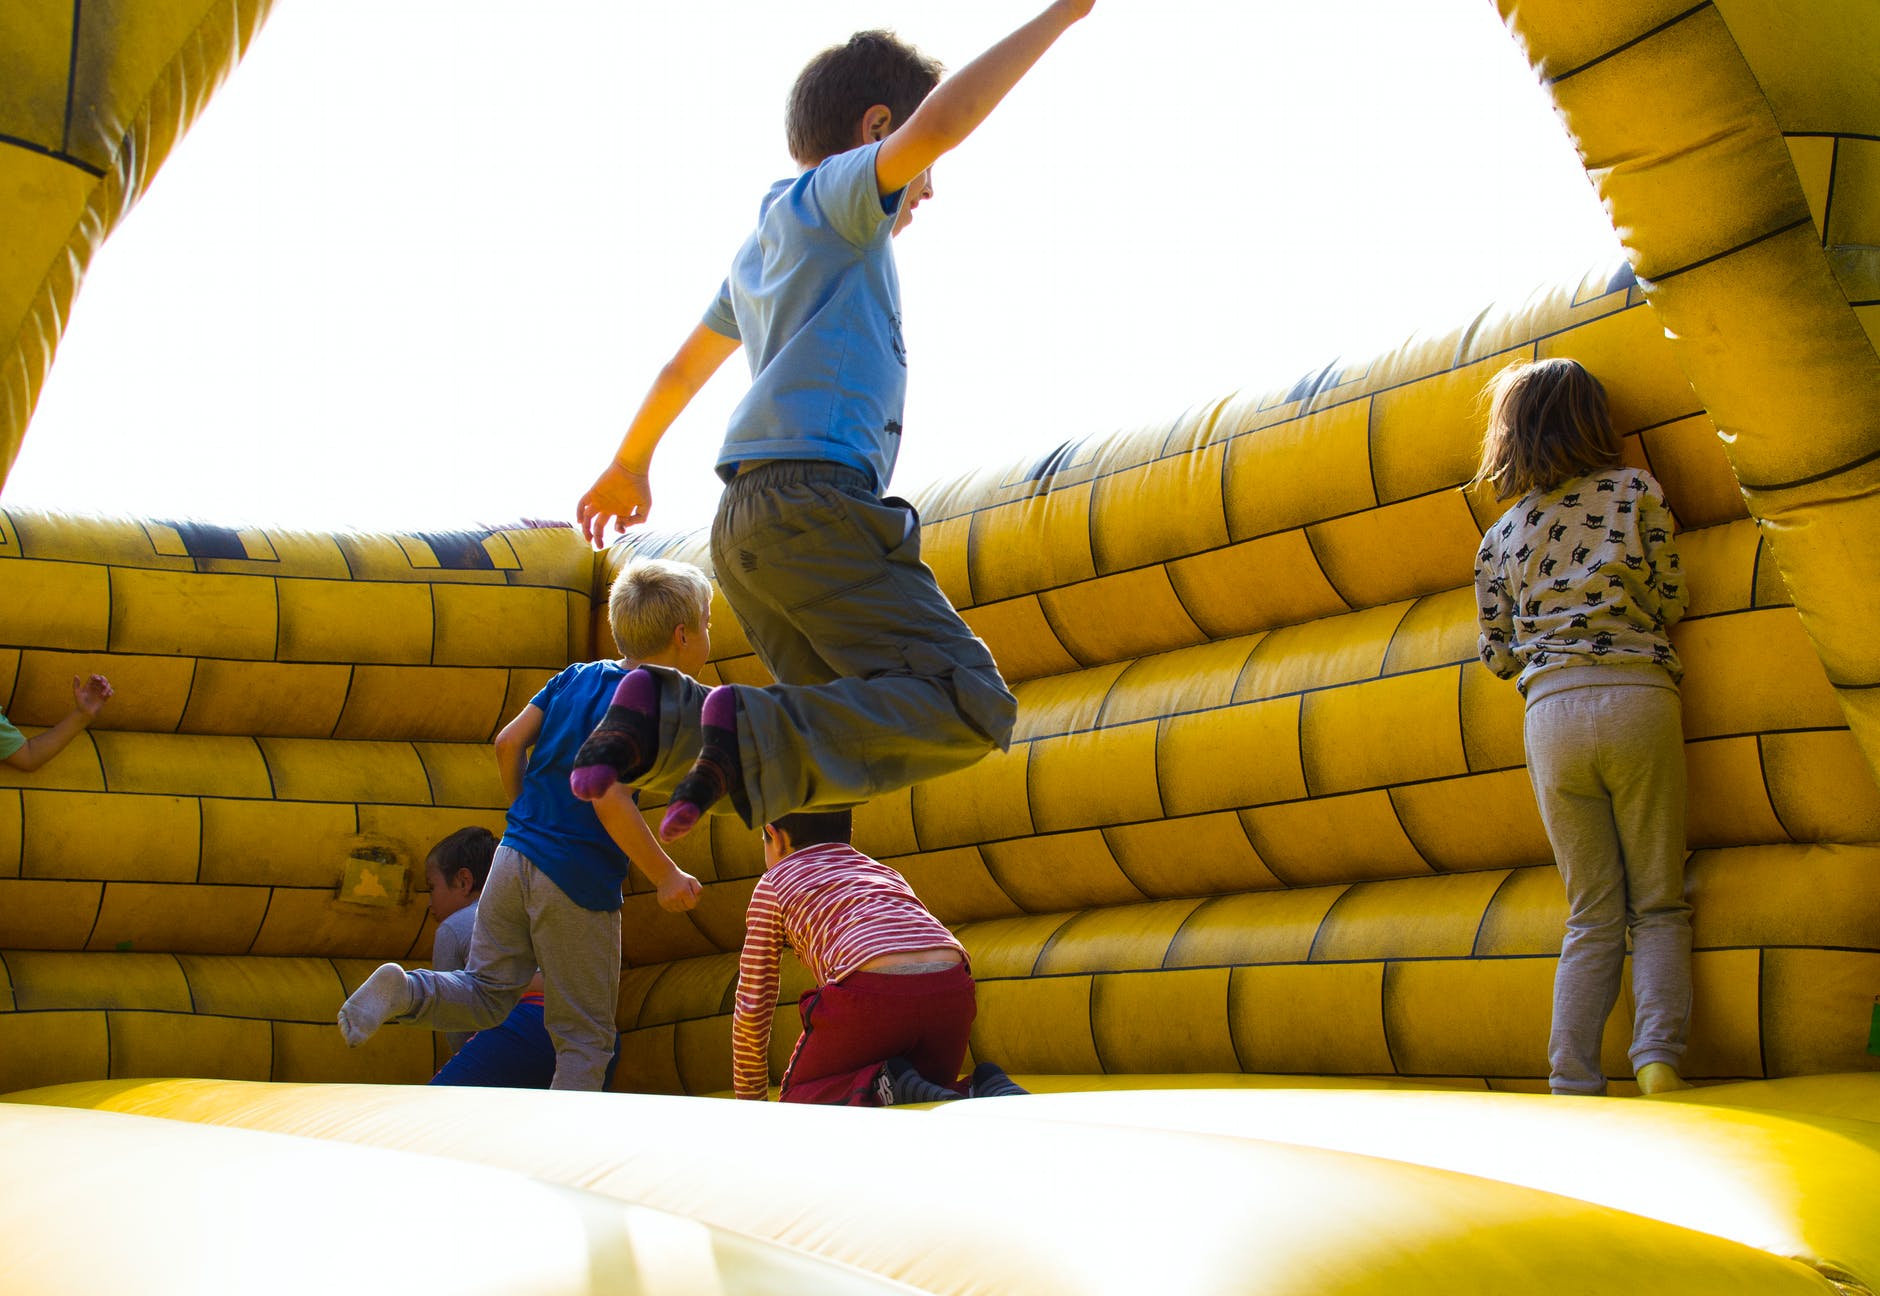 Five children die after falling from bouncy castle that rose 10 meters